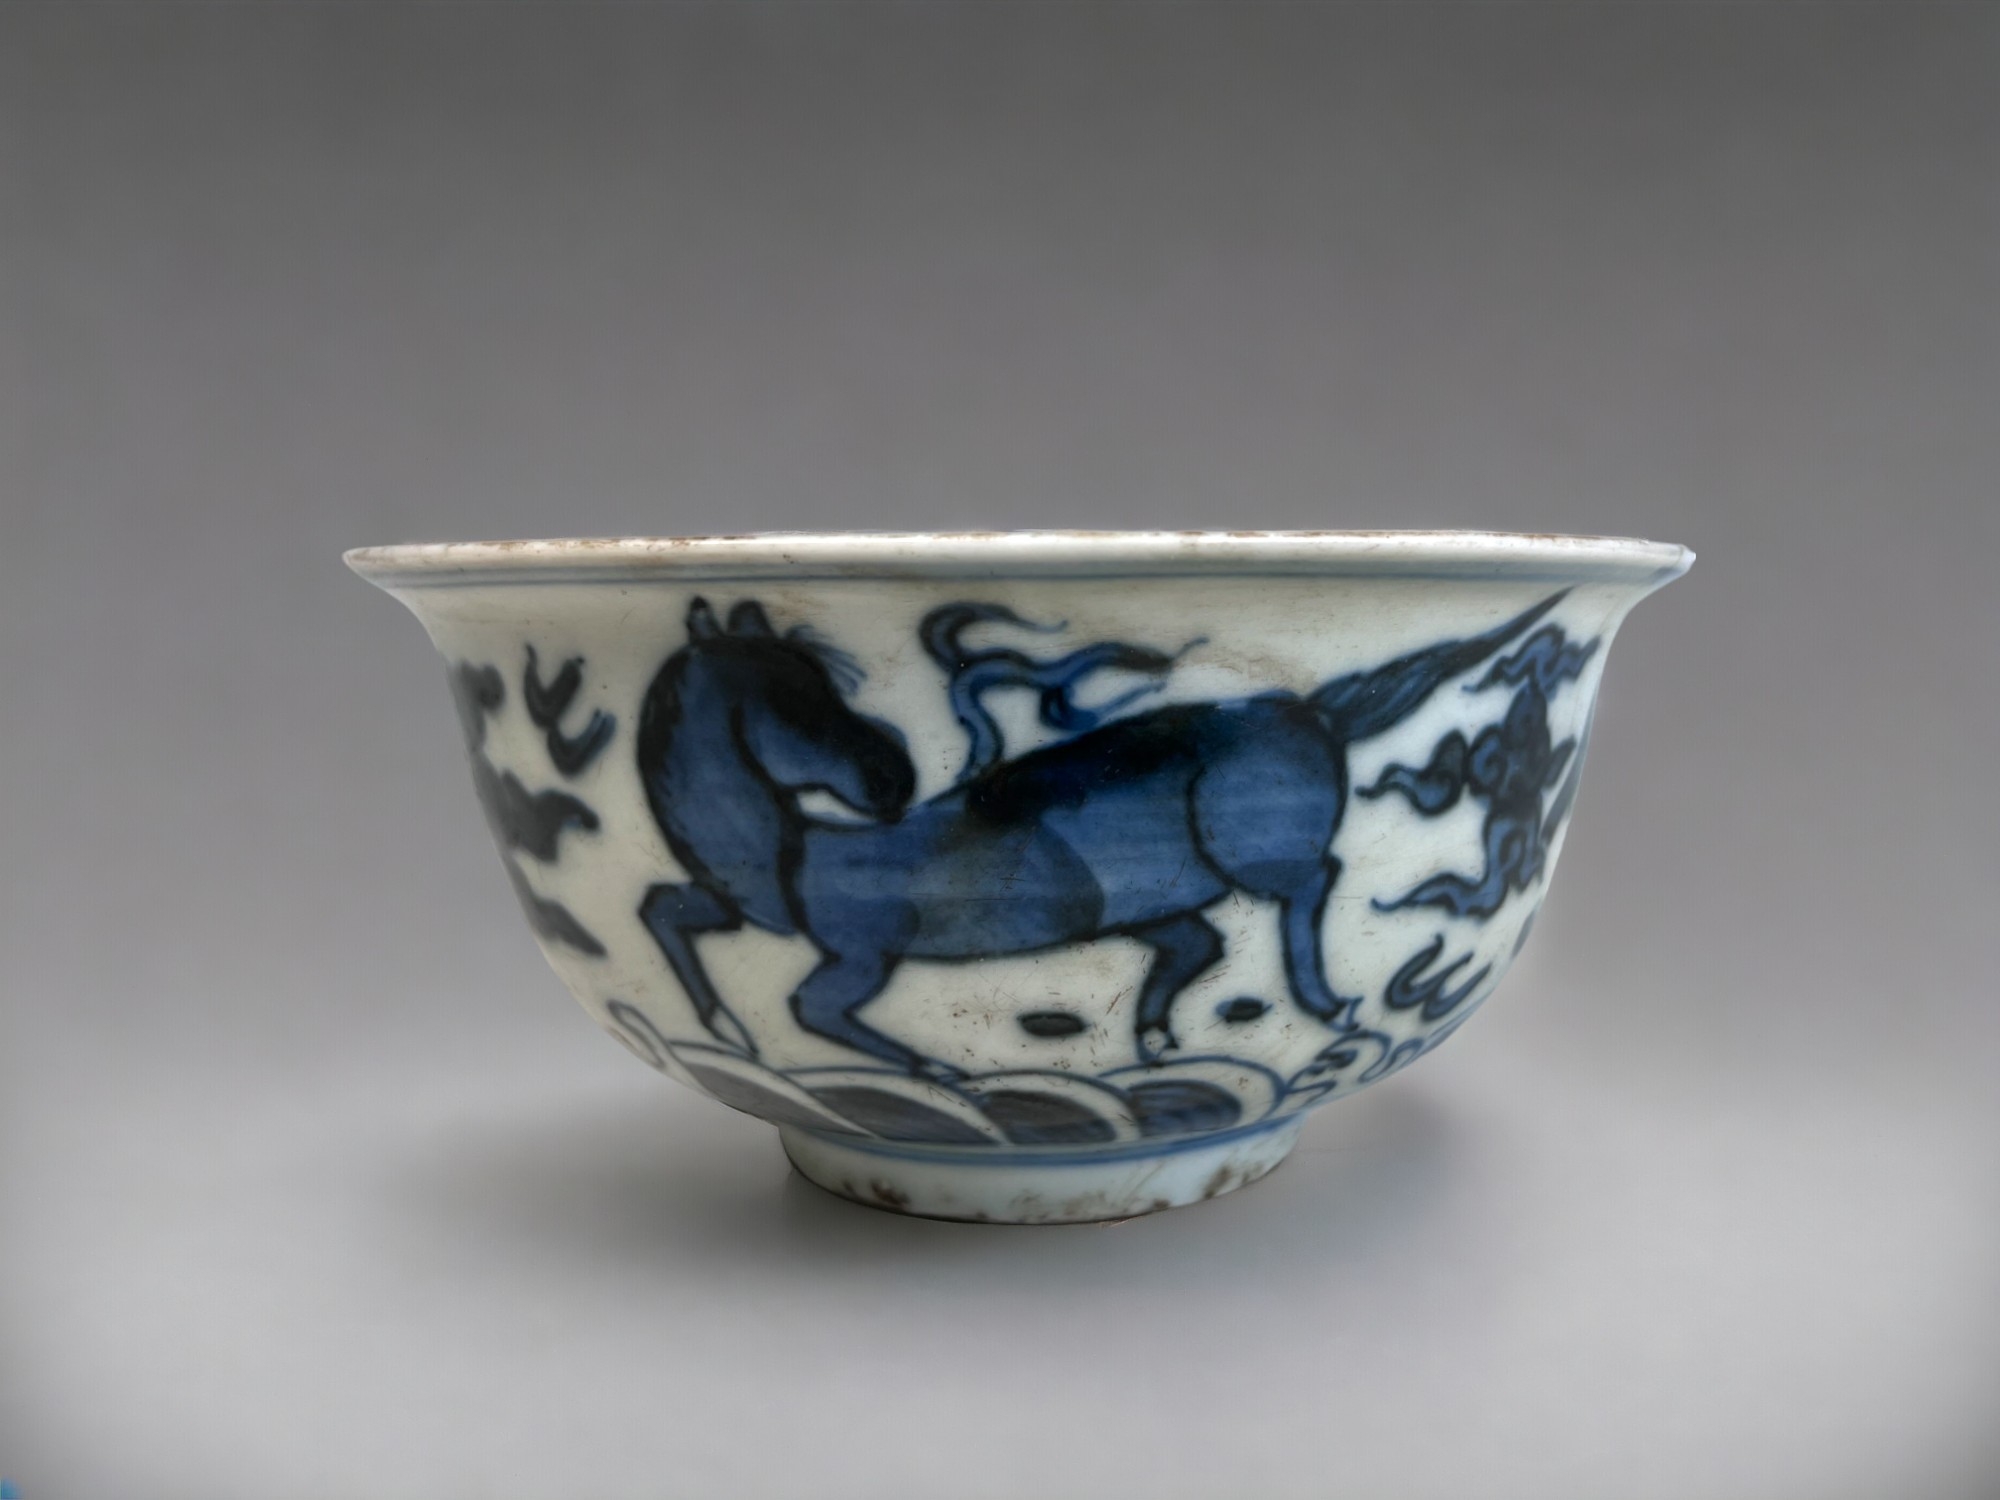 A CHINESE BLUE & WHITE PORCELAIN BOWL. Painted in the Kangxi style, depicting mythical Horse, - Image 2 of 5